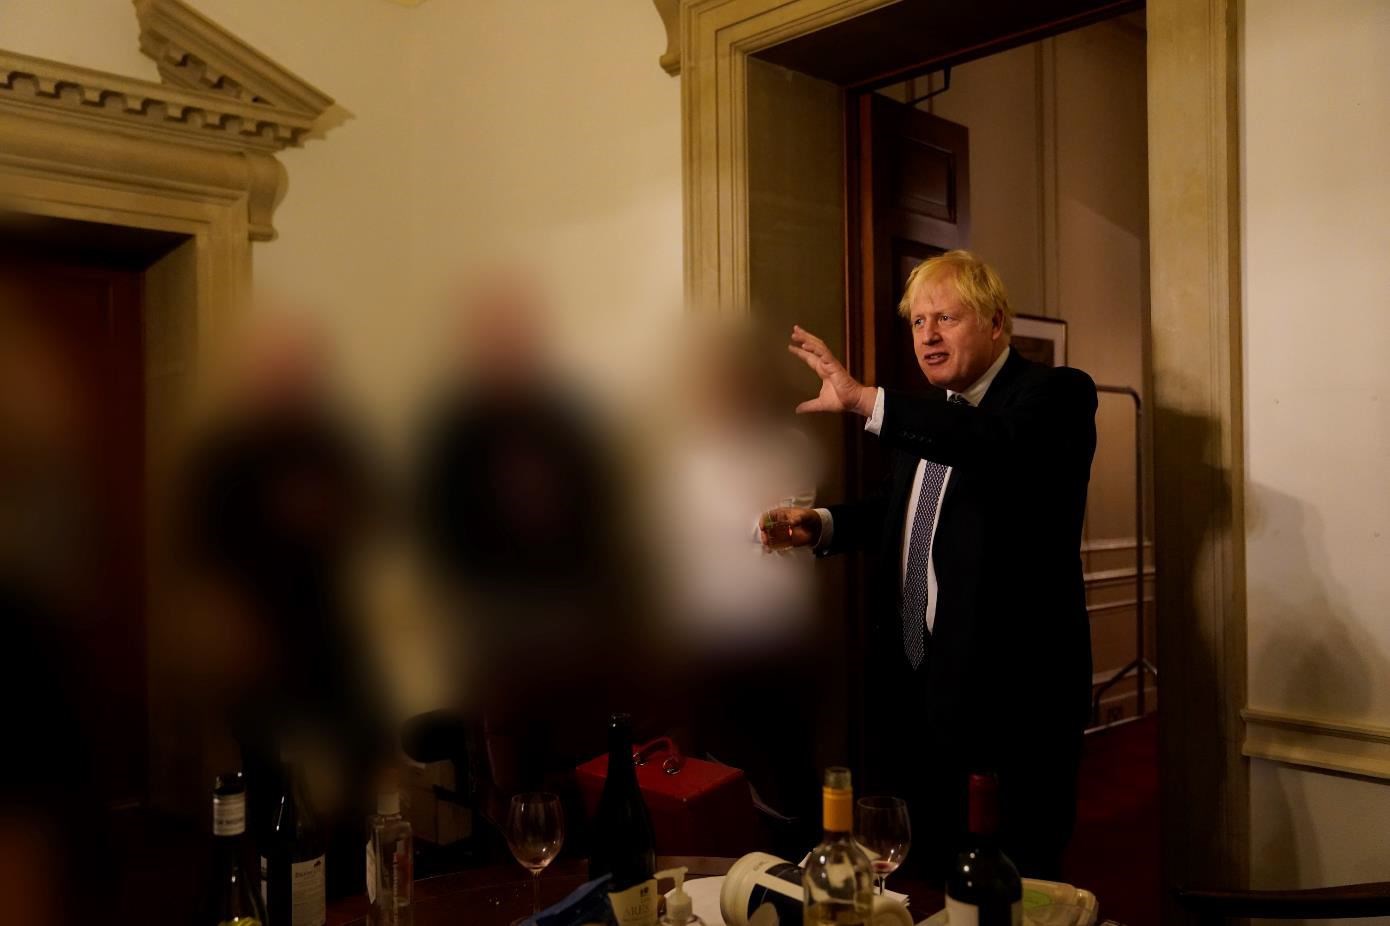 Boris Johnson pictured at a gathering in 10 Downing Street during lockdown (Sue Gray Report/Cabinet Office)